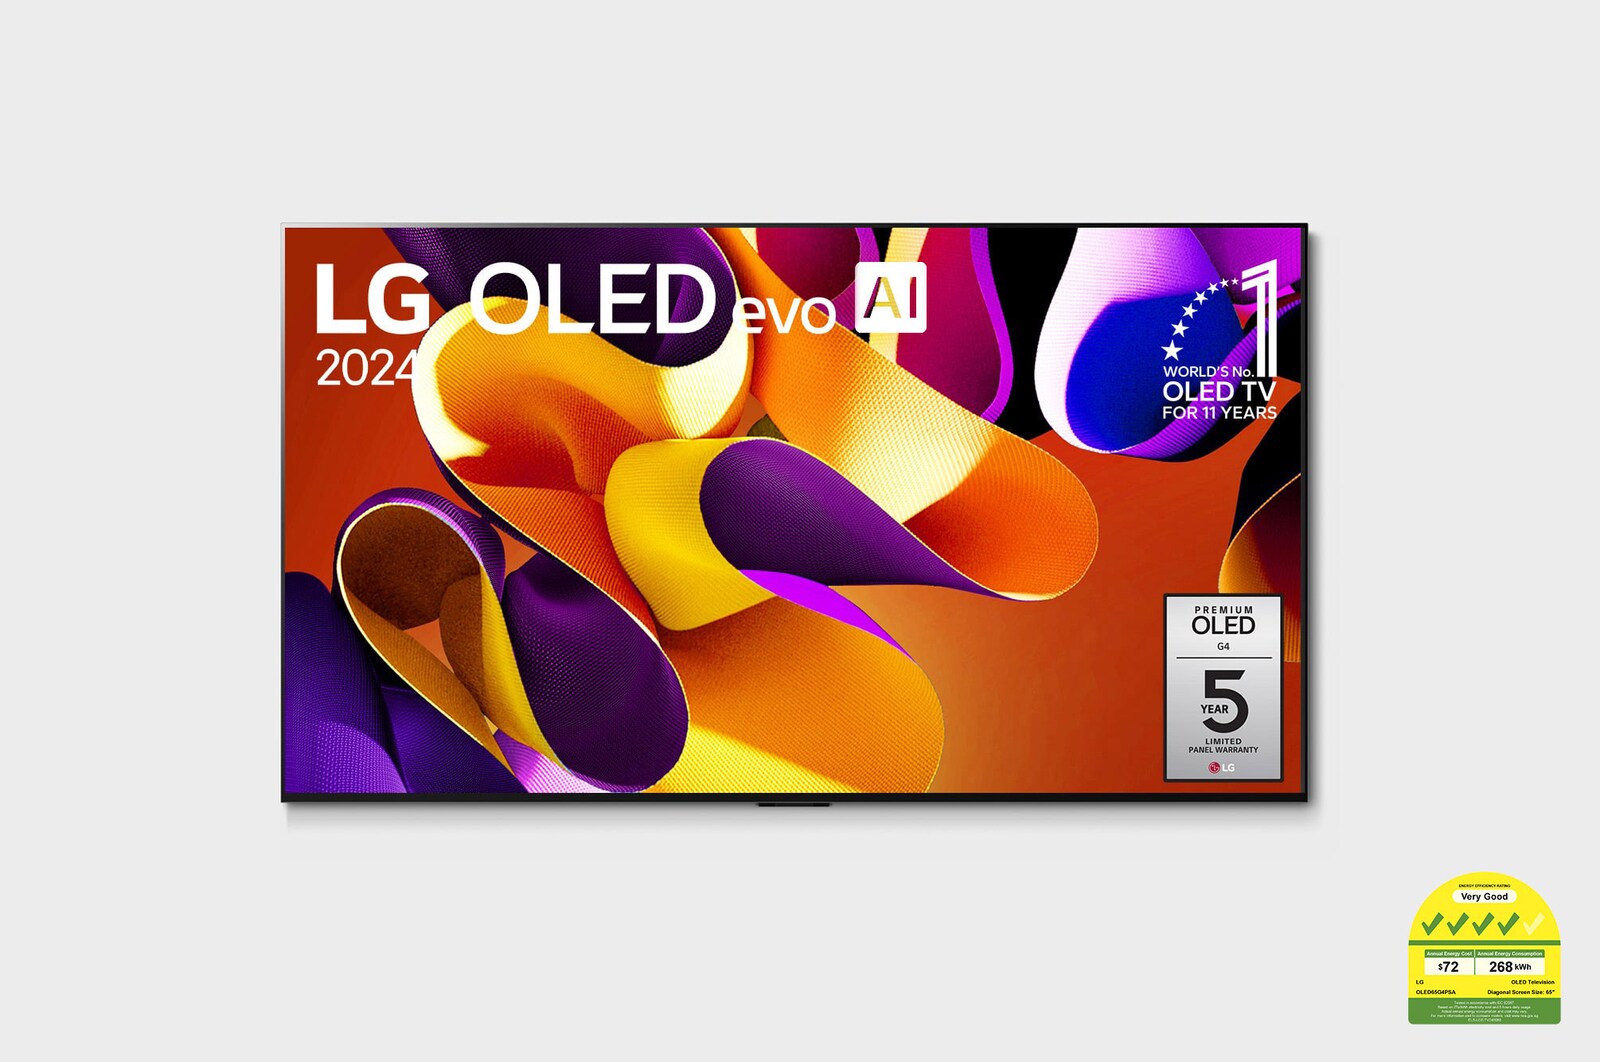 Front view with LG OLED evo and 11 Years World No.1 OLED Emblem on screen, as well as the Soundbar below